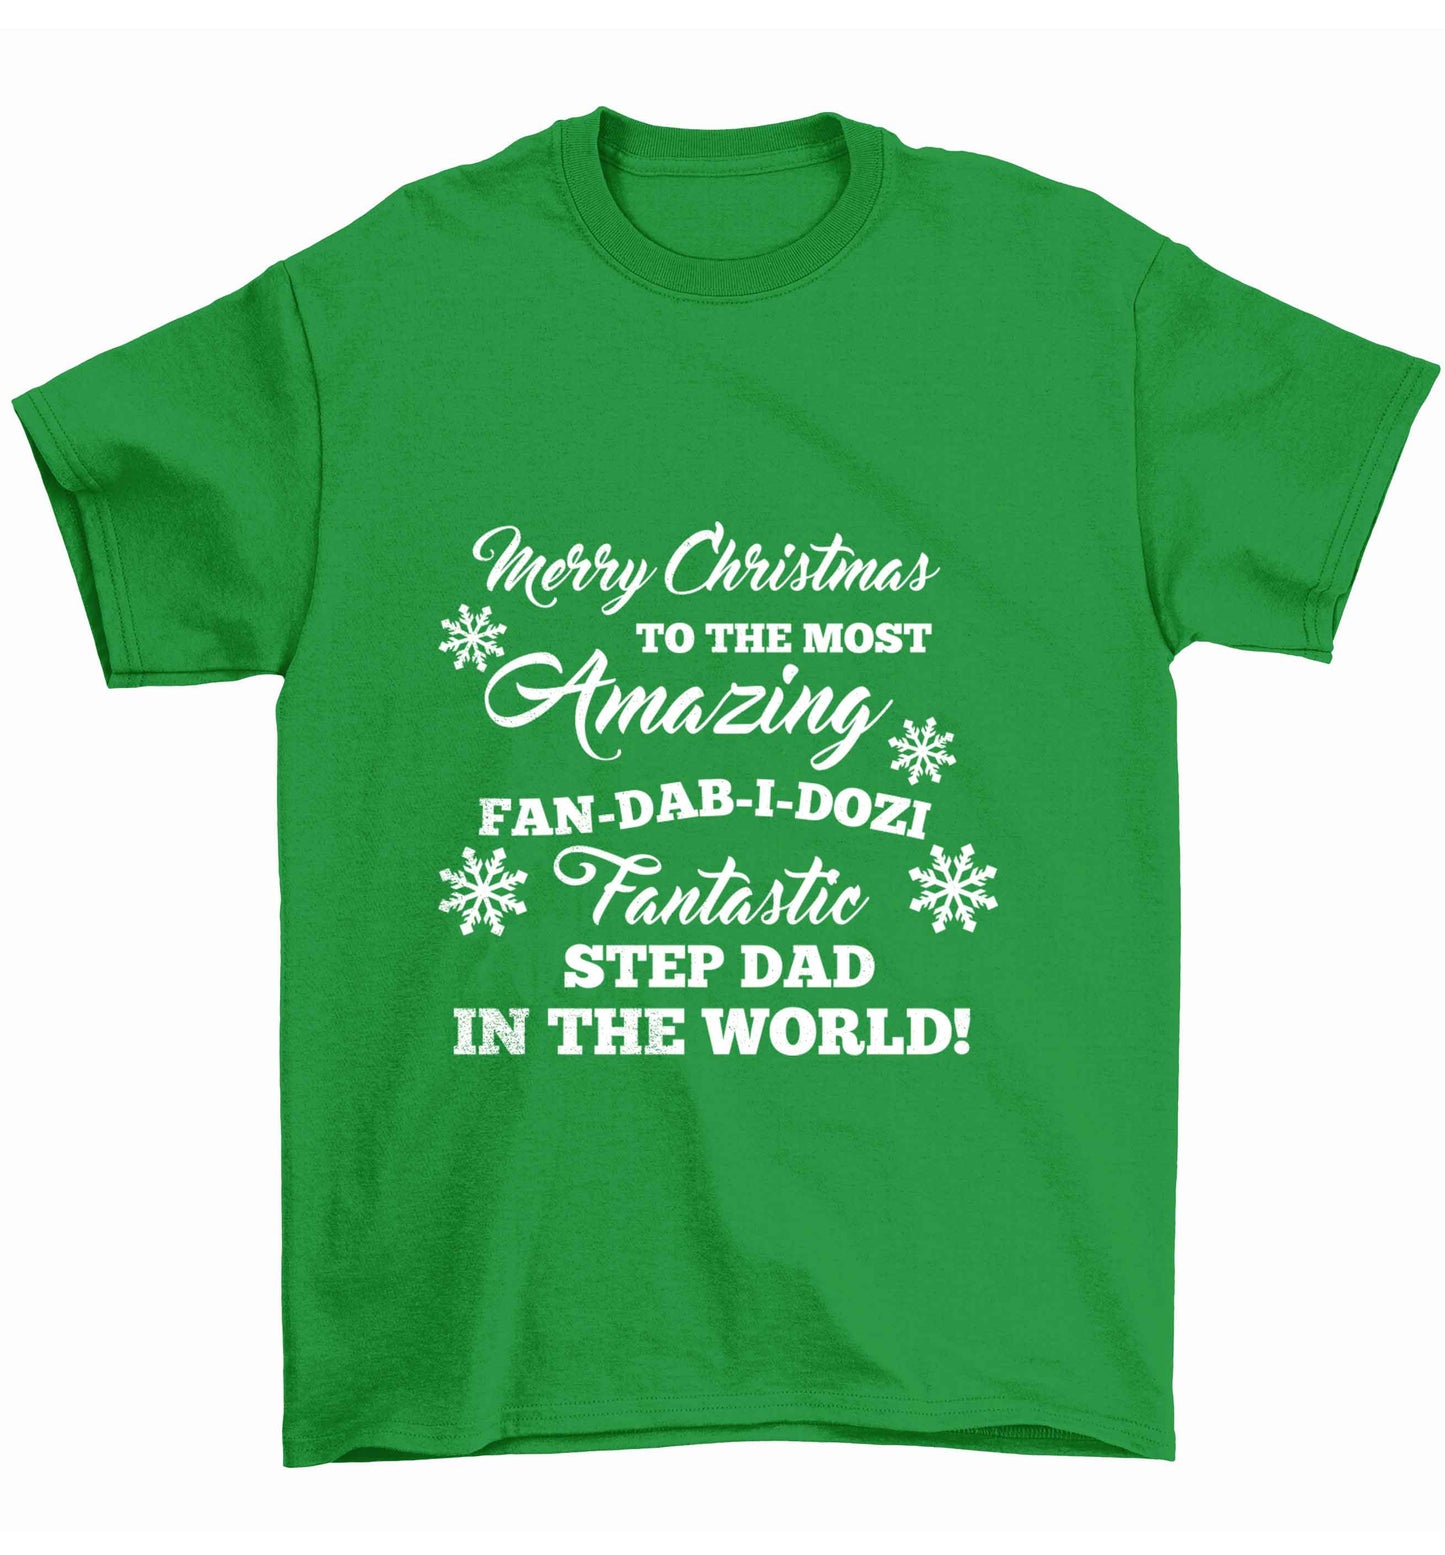 Merry Christmas to the most amazing fan-dab-i-dozi fantasic Step Dad in the world Children's green Tshirt 12-13 Years